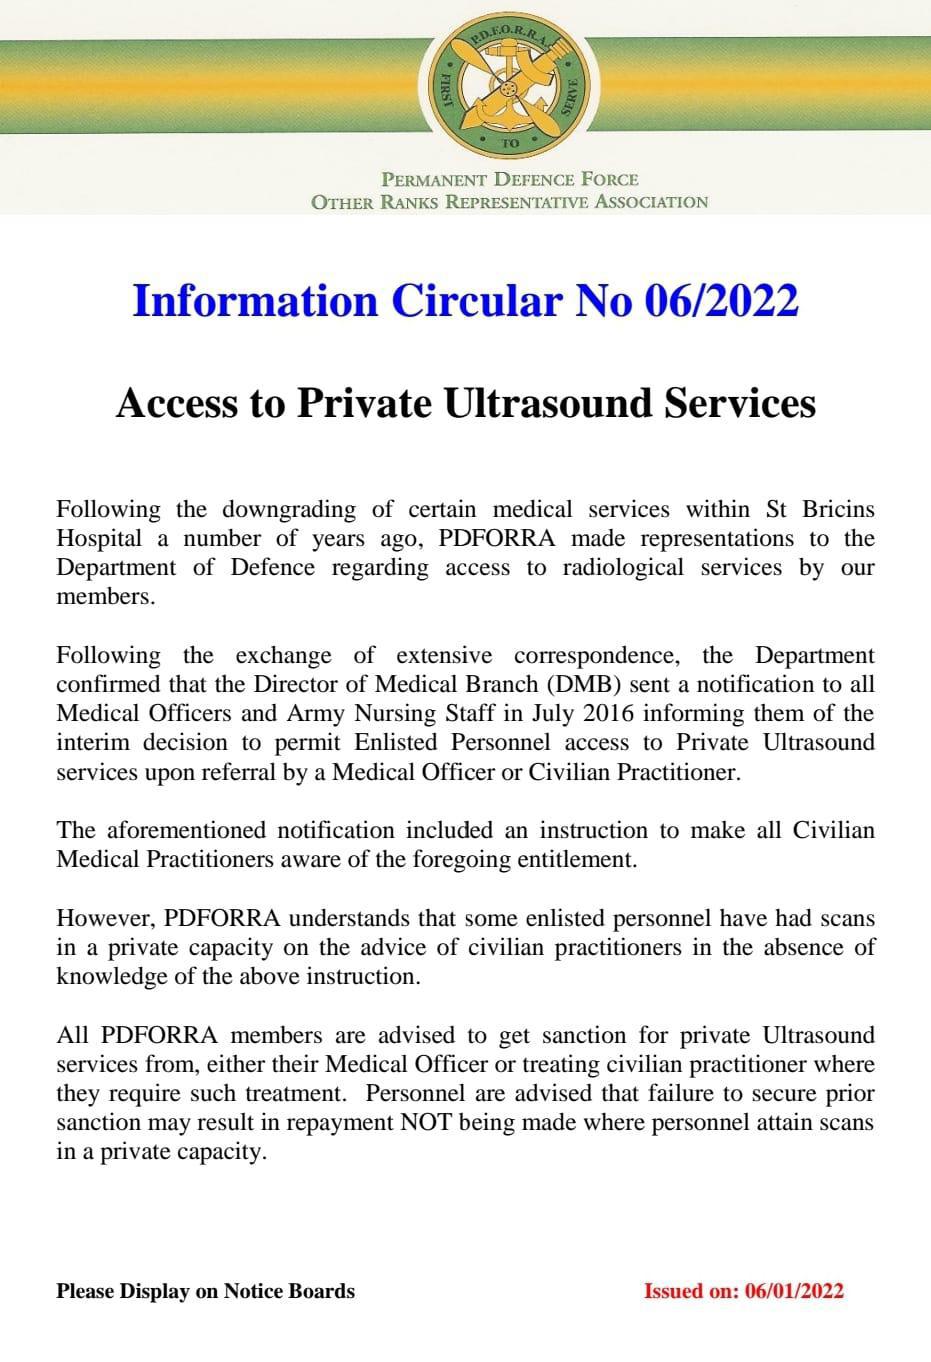 Information Circular No 06 of 22 - Access to Private Ultrasound Services